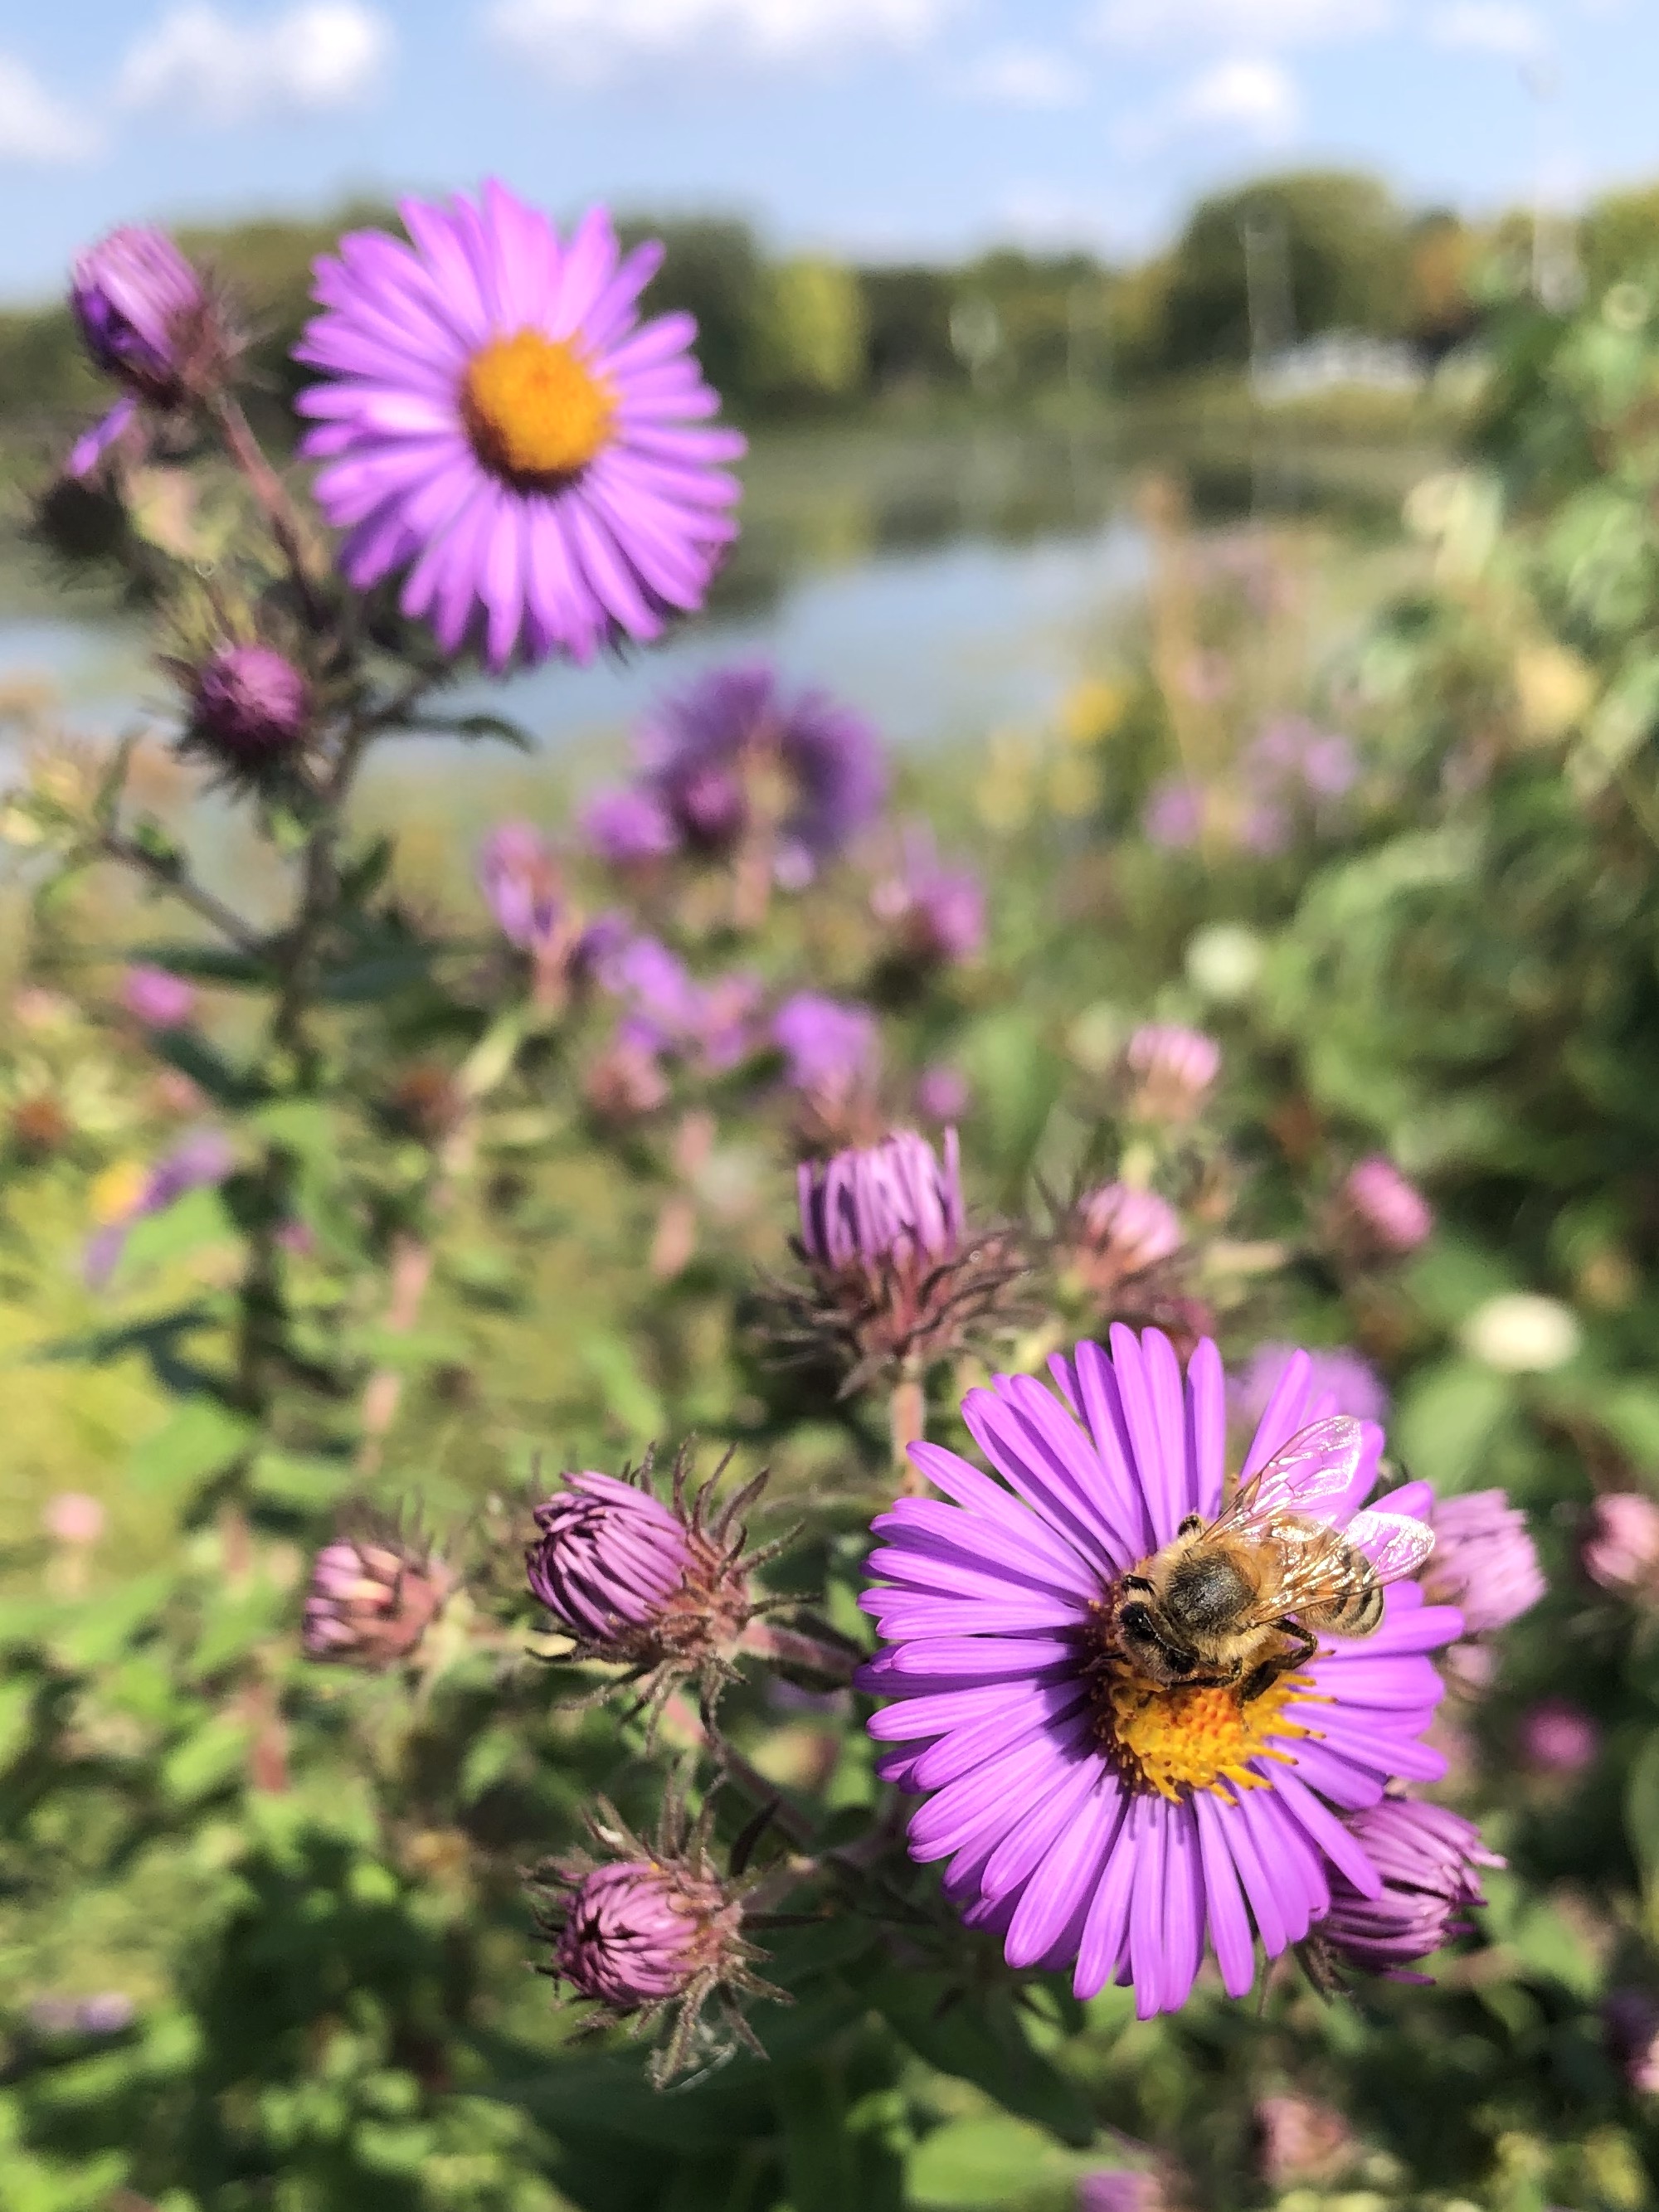 New England Aster on shore of Vilas Park Lagoon in Madison, Wisconsin on September 19, 2021.